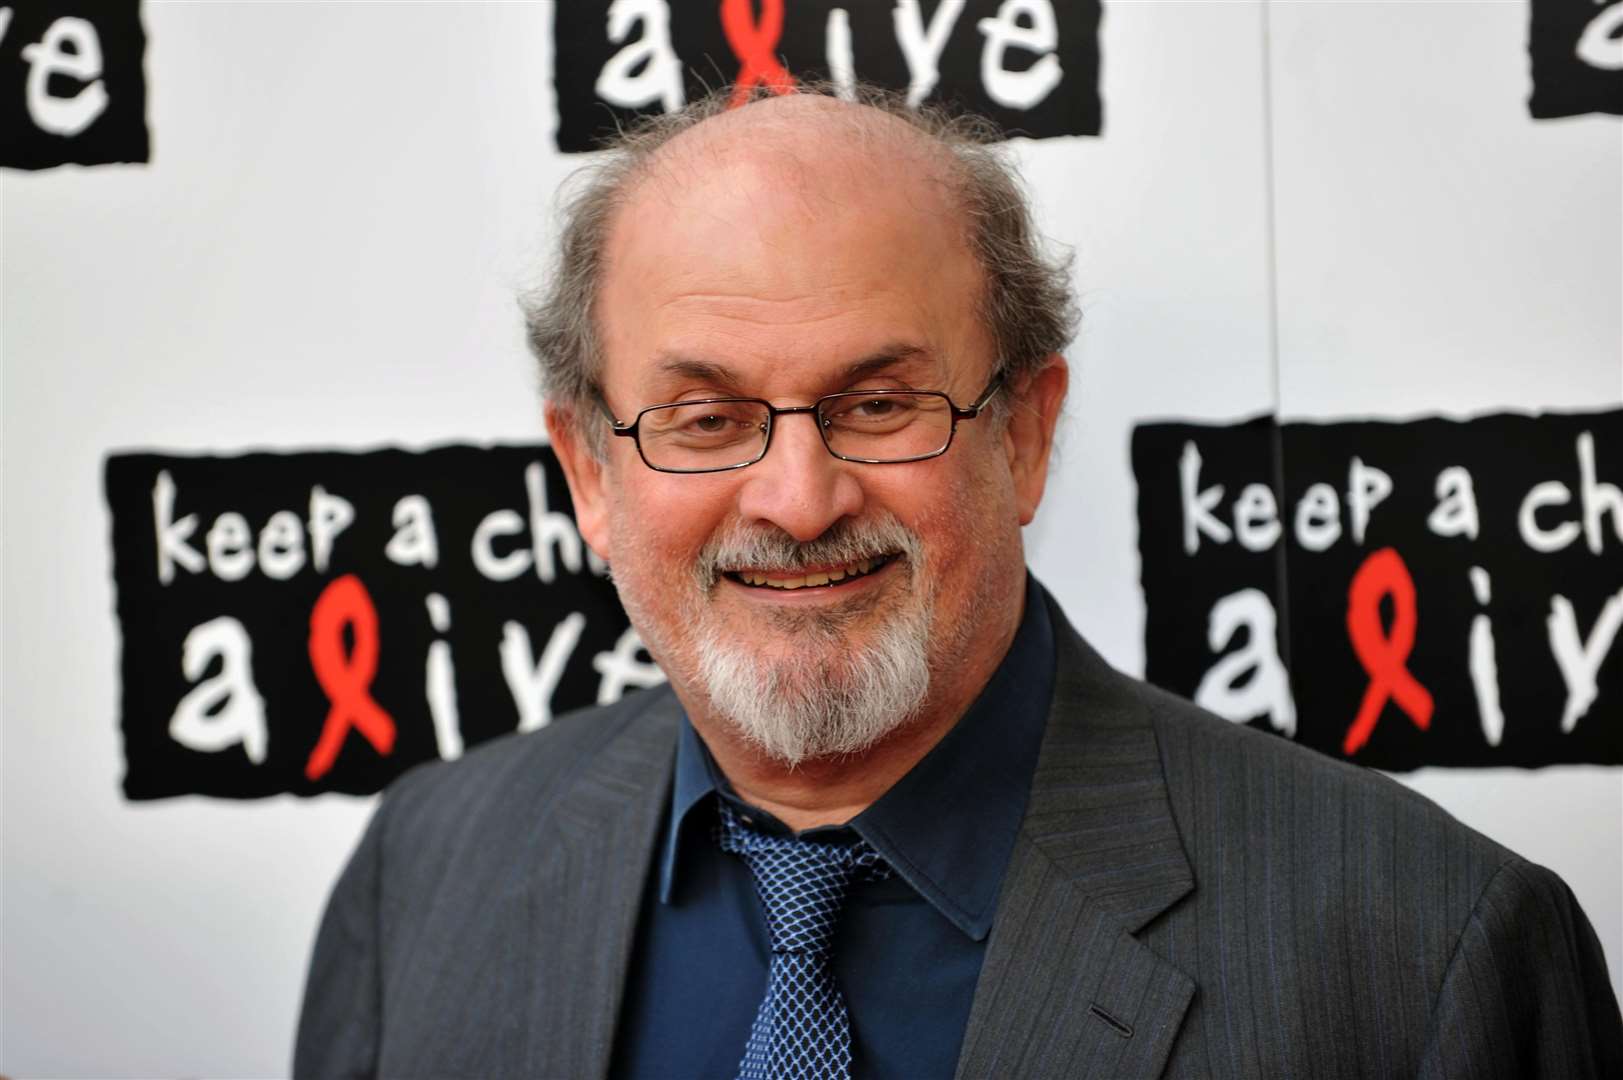 Sir Salman Rushdie lost an eye as a result of the attack (Ian Nicholson/PA)